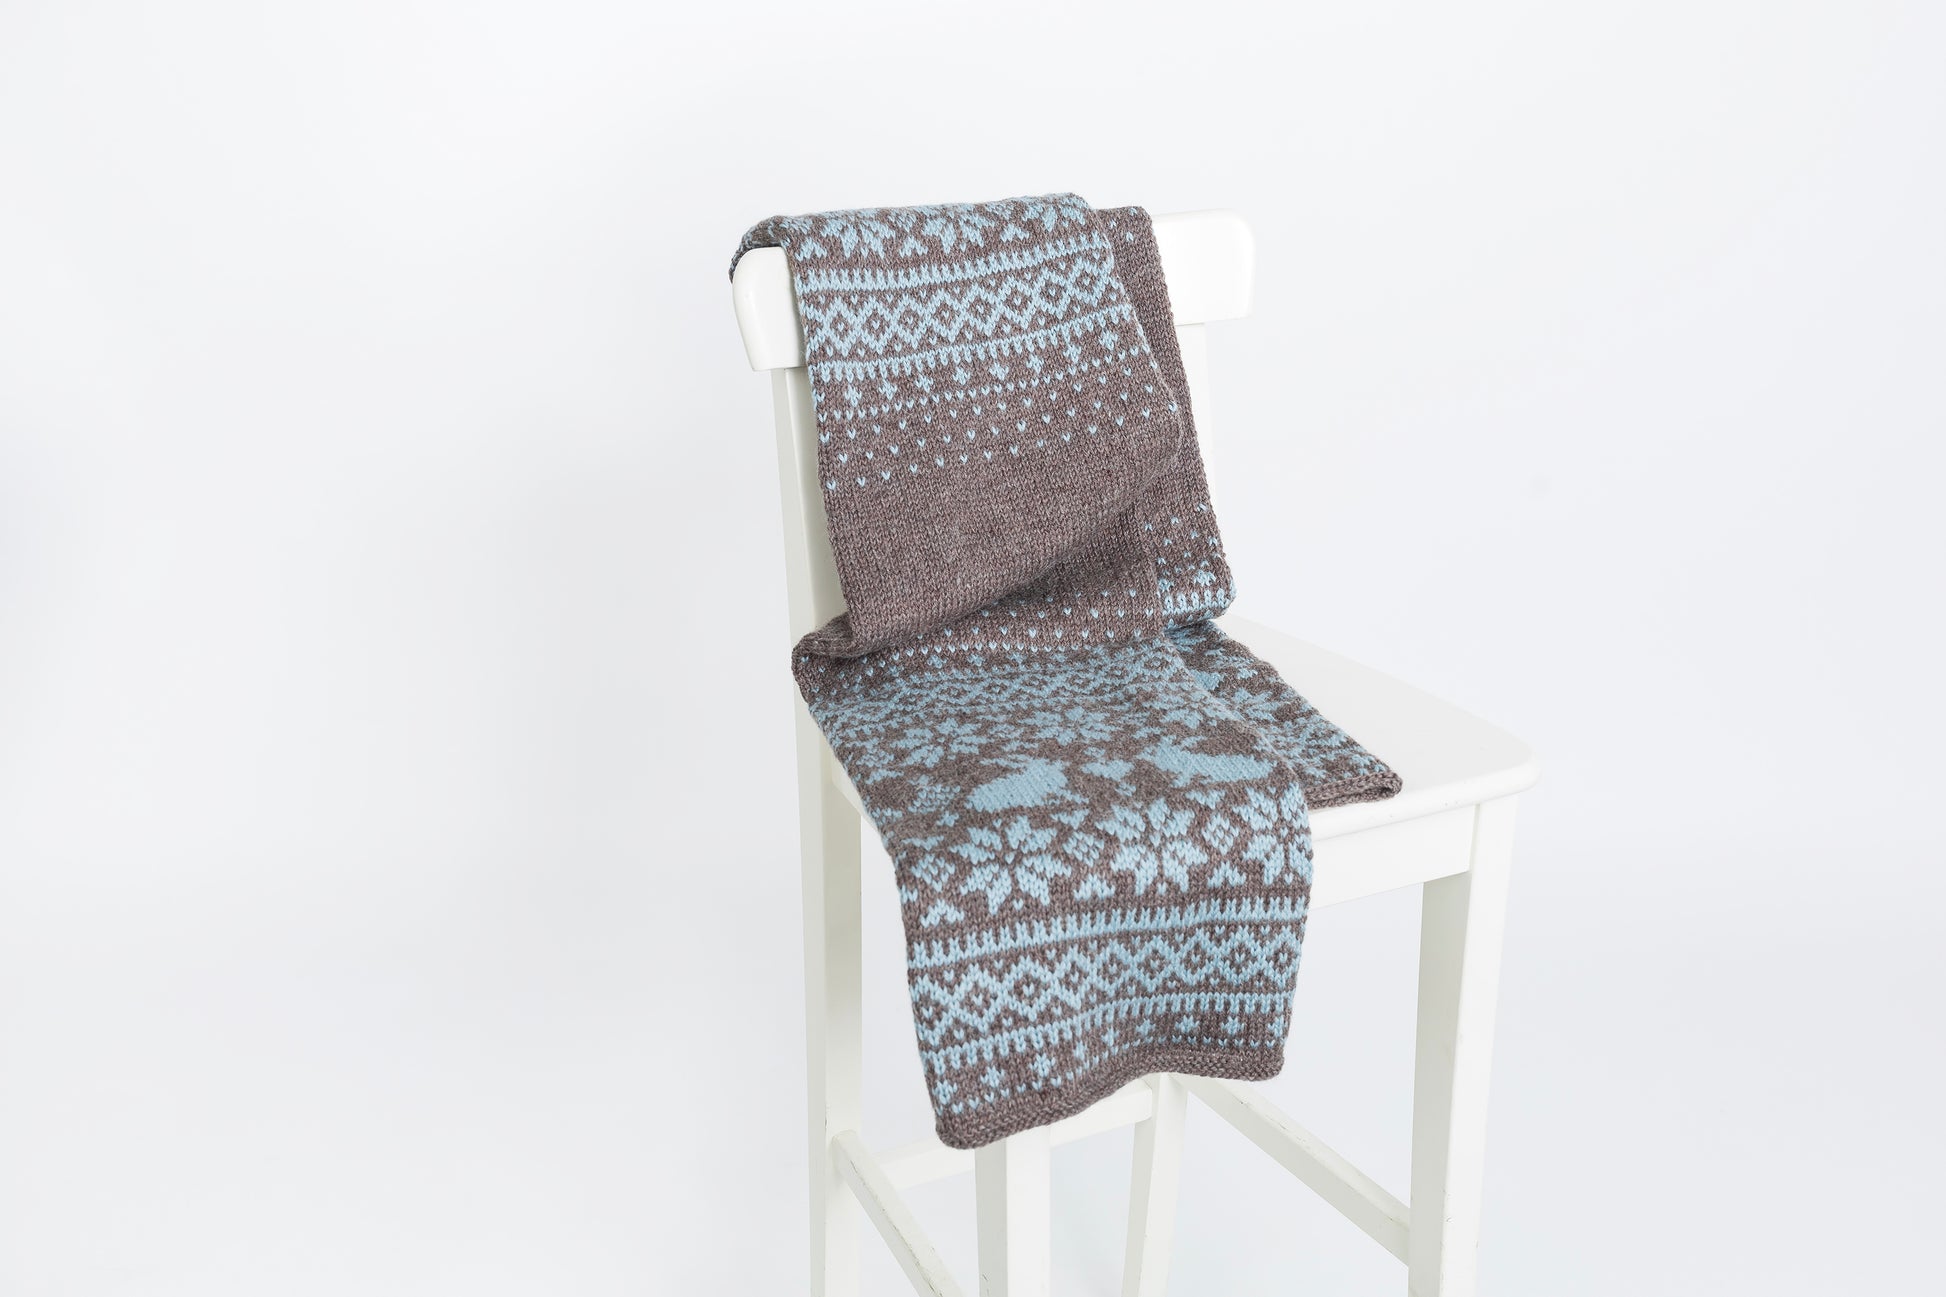 Brown and grey blue wool hand-knitted long Fair Isle scarf in Bunny Rabbit pattern